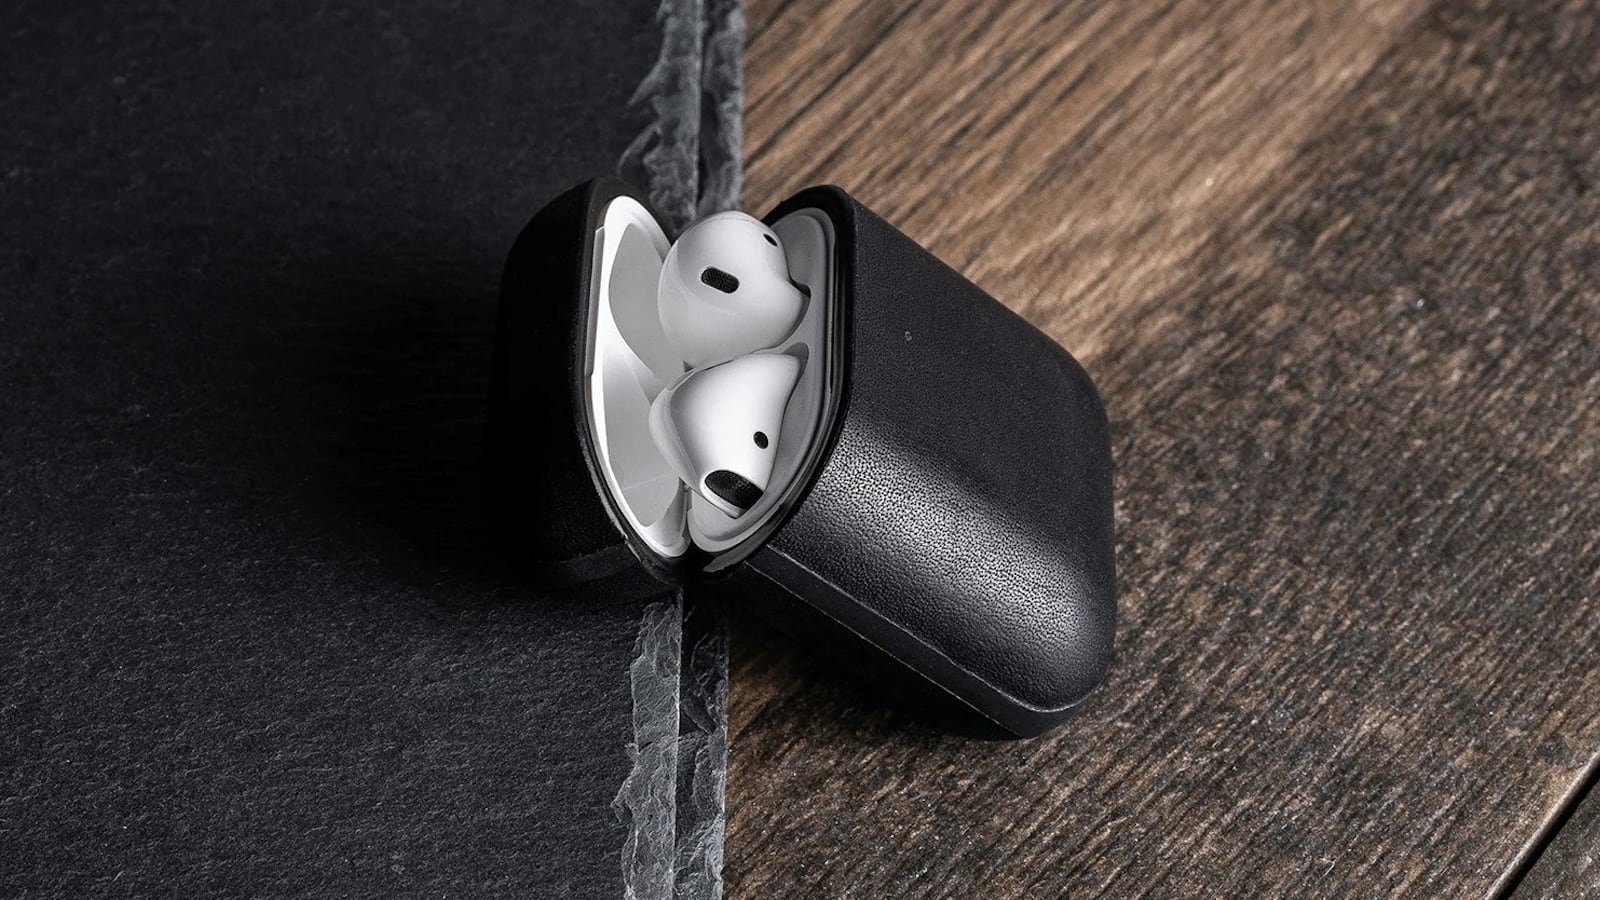 Nomad Rugged Case AirPods wireless charging cover has a light pipe for the LED indicator